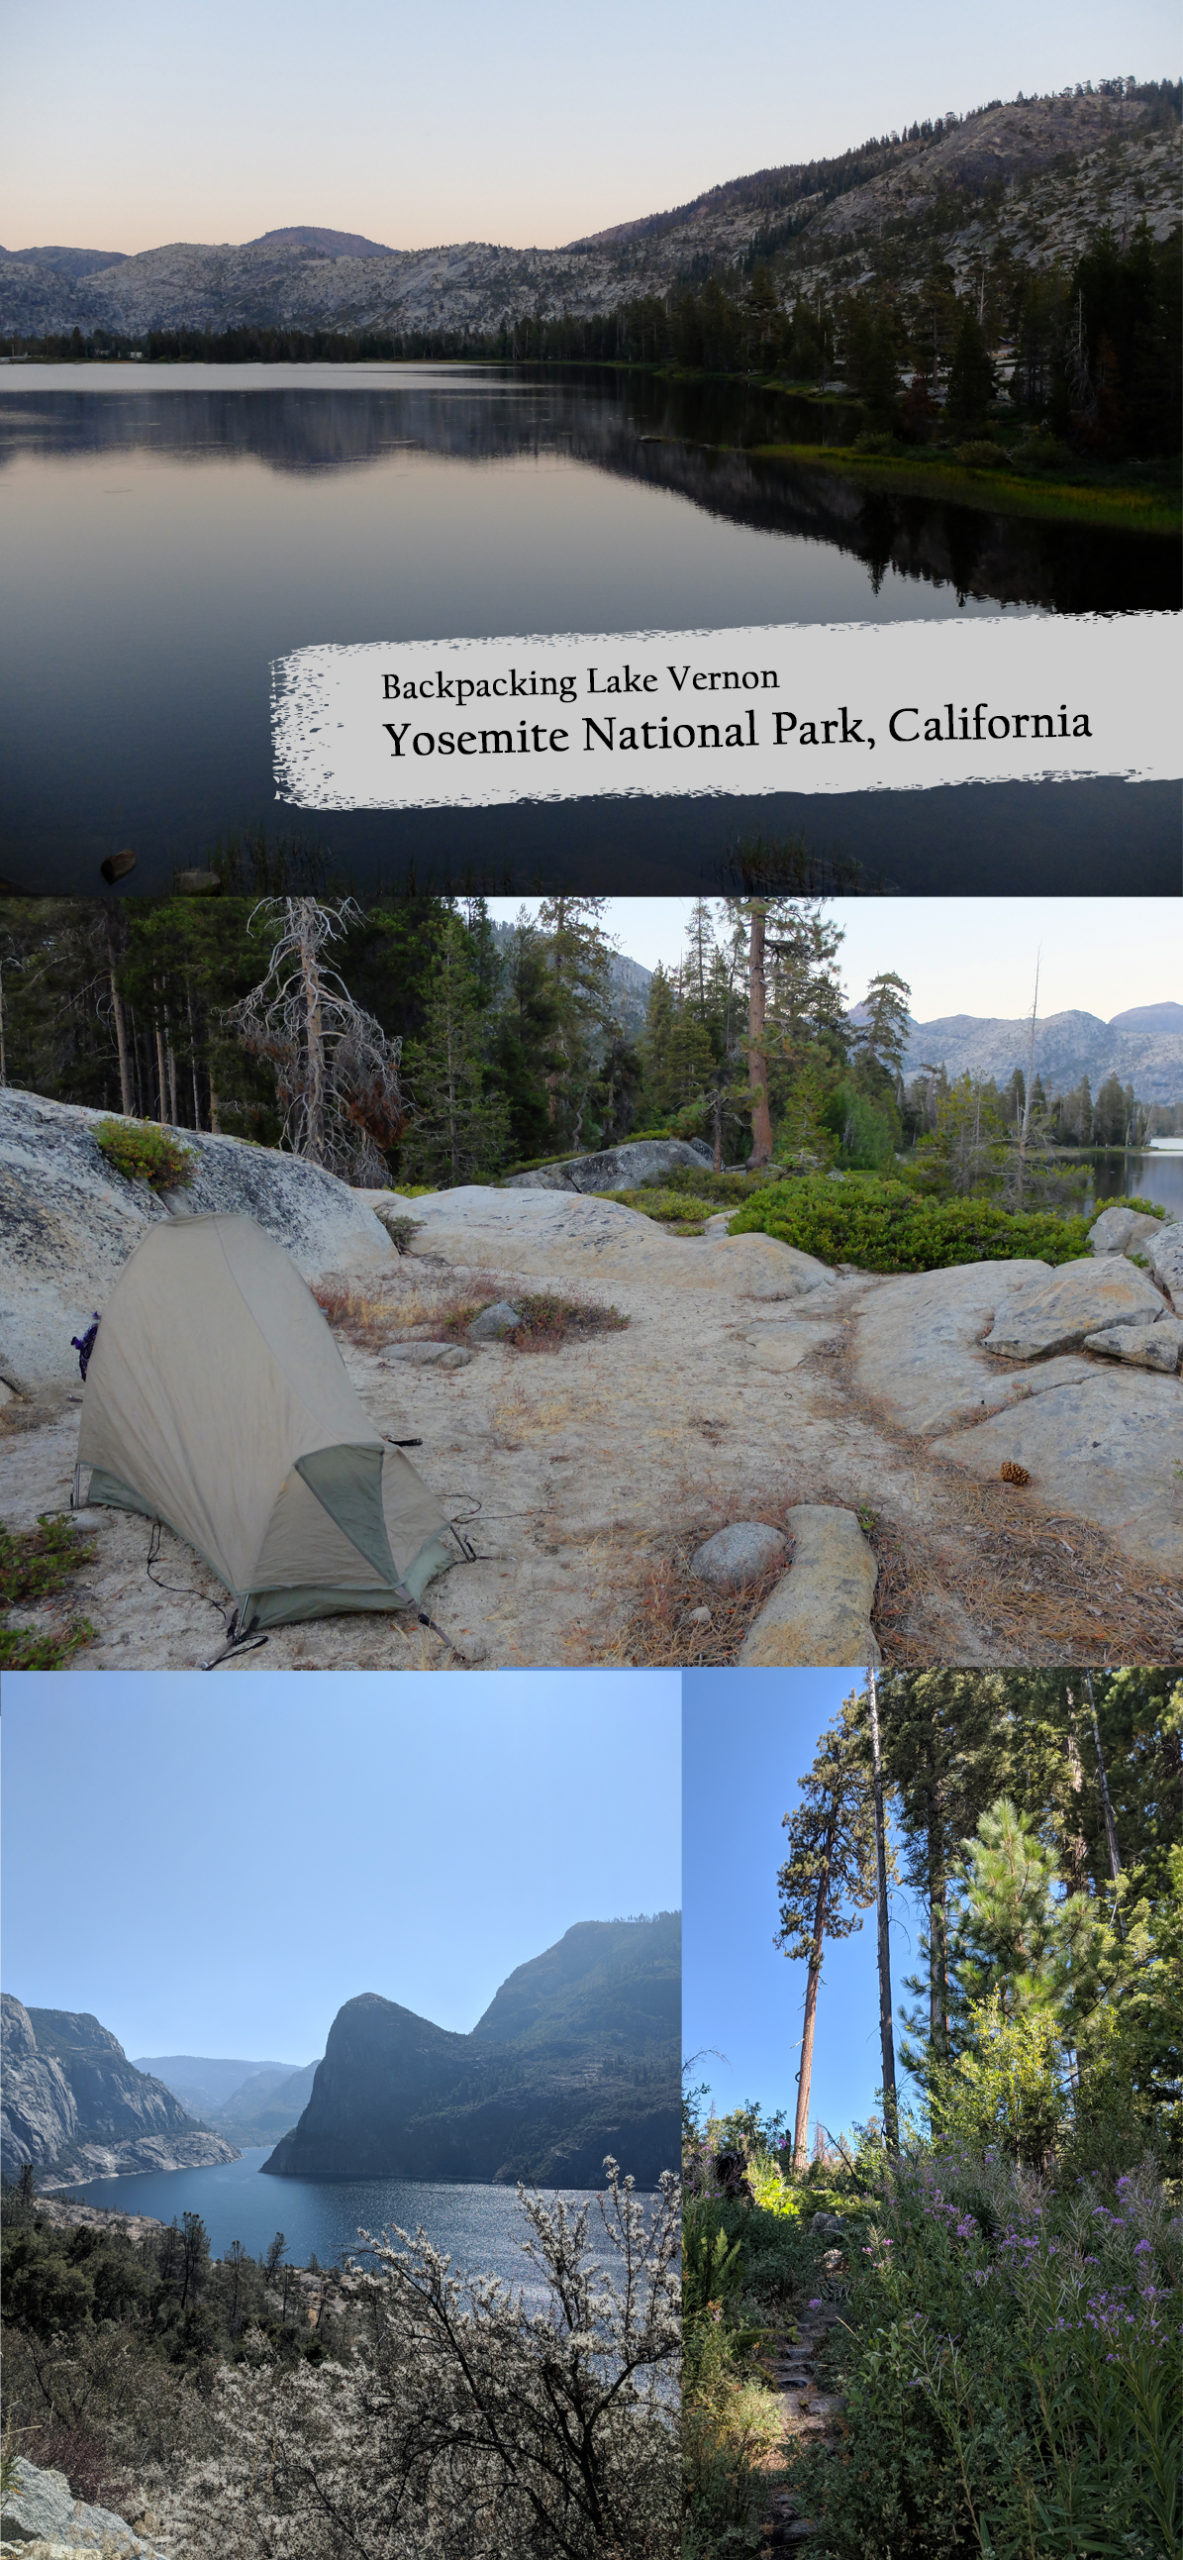 Yosemite National Park Backpacking - Overnight to Vernon Lake, or three day loop.